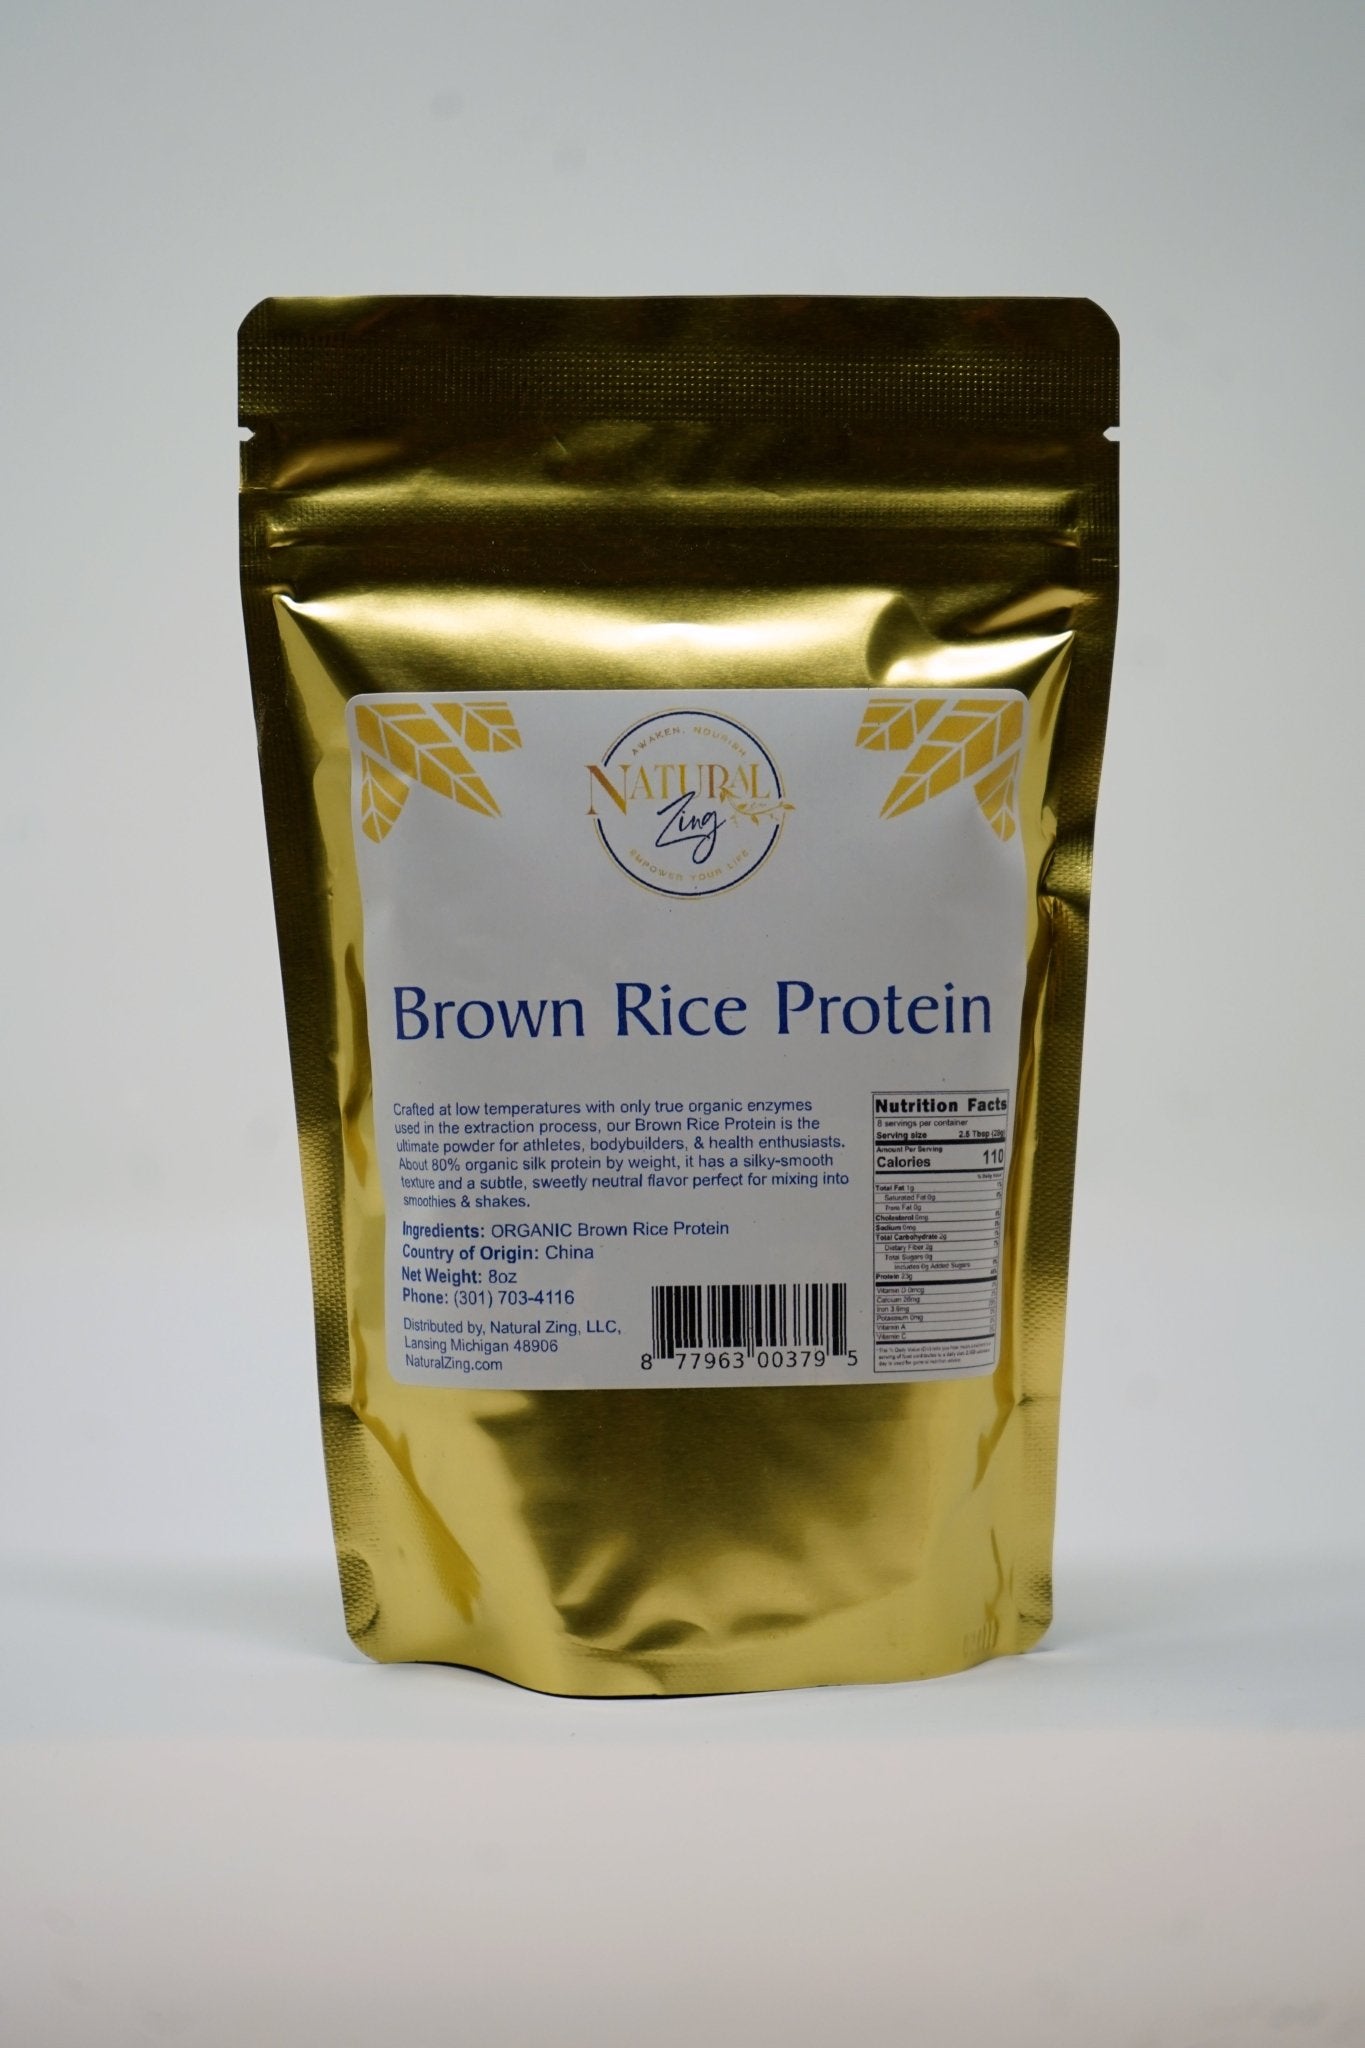 Brown Rice Protein 8 oz - Natural Zing